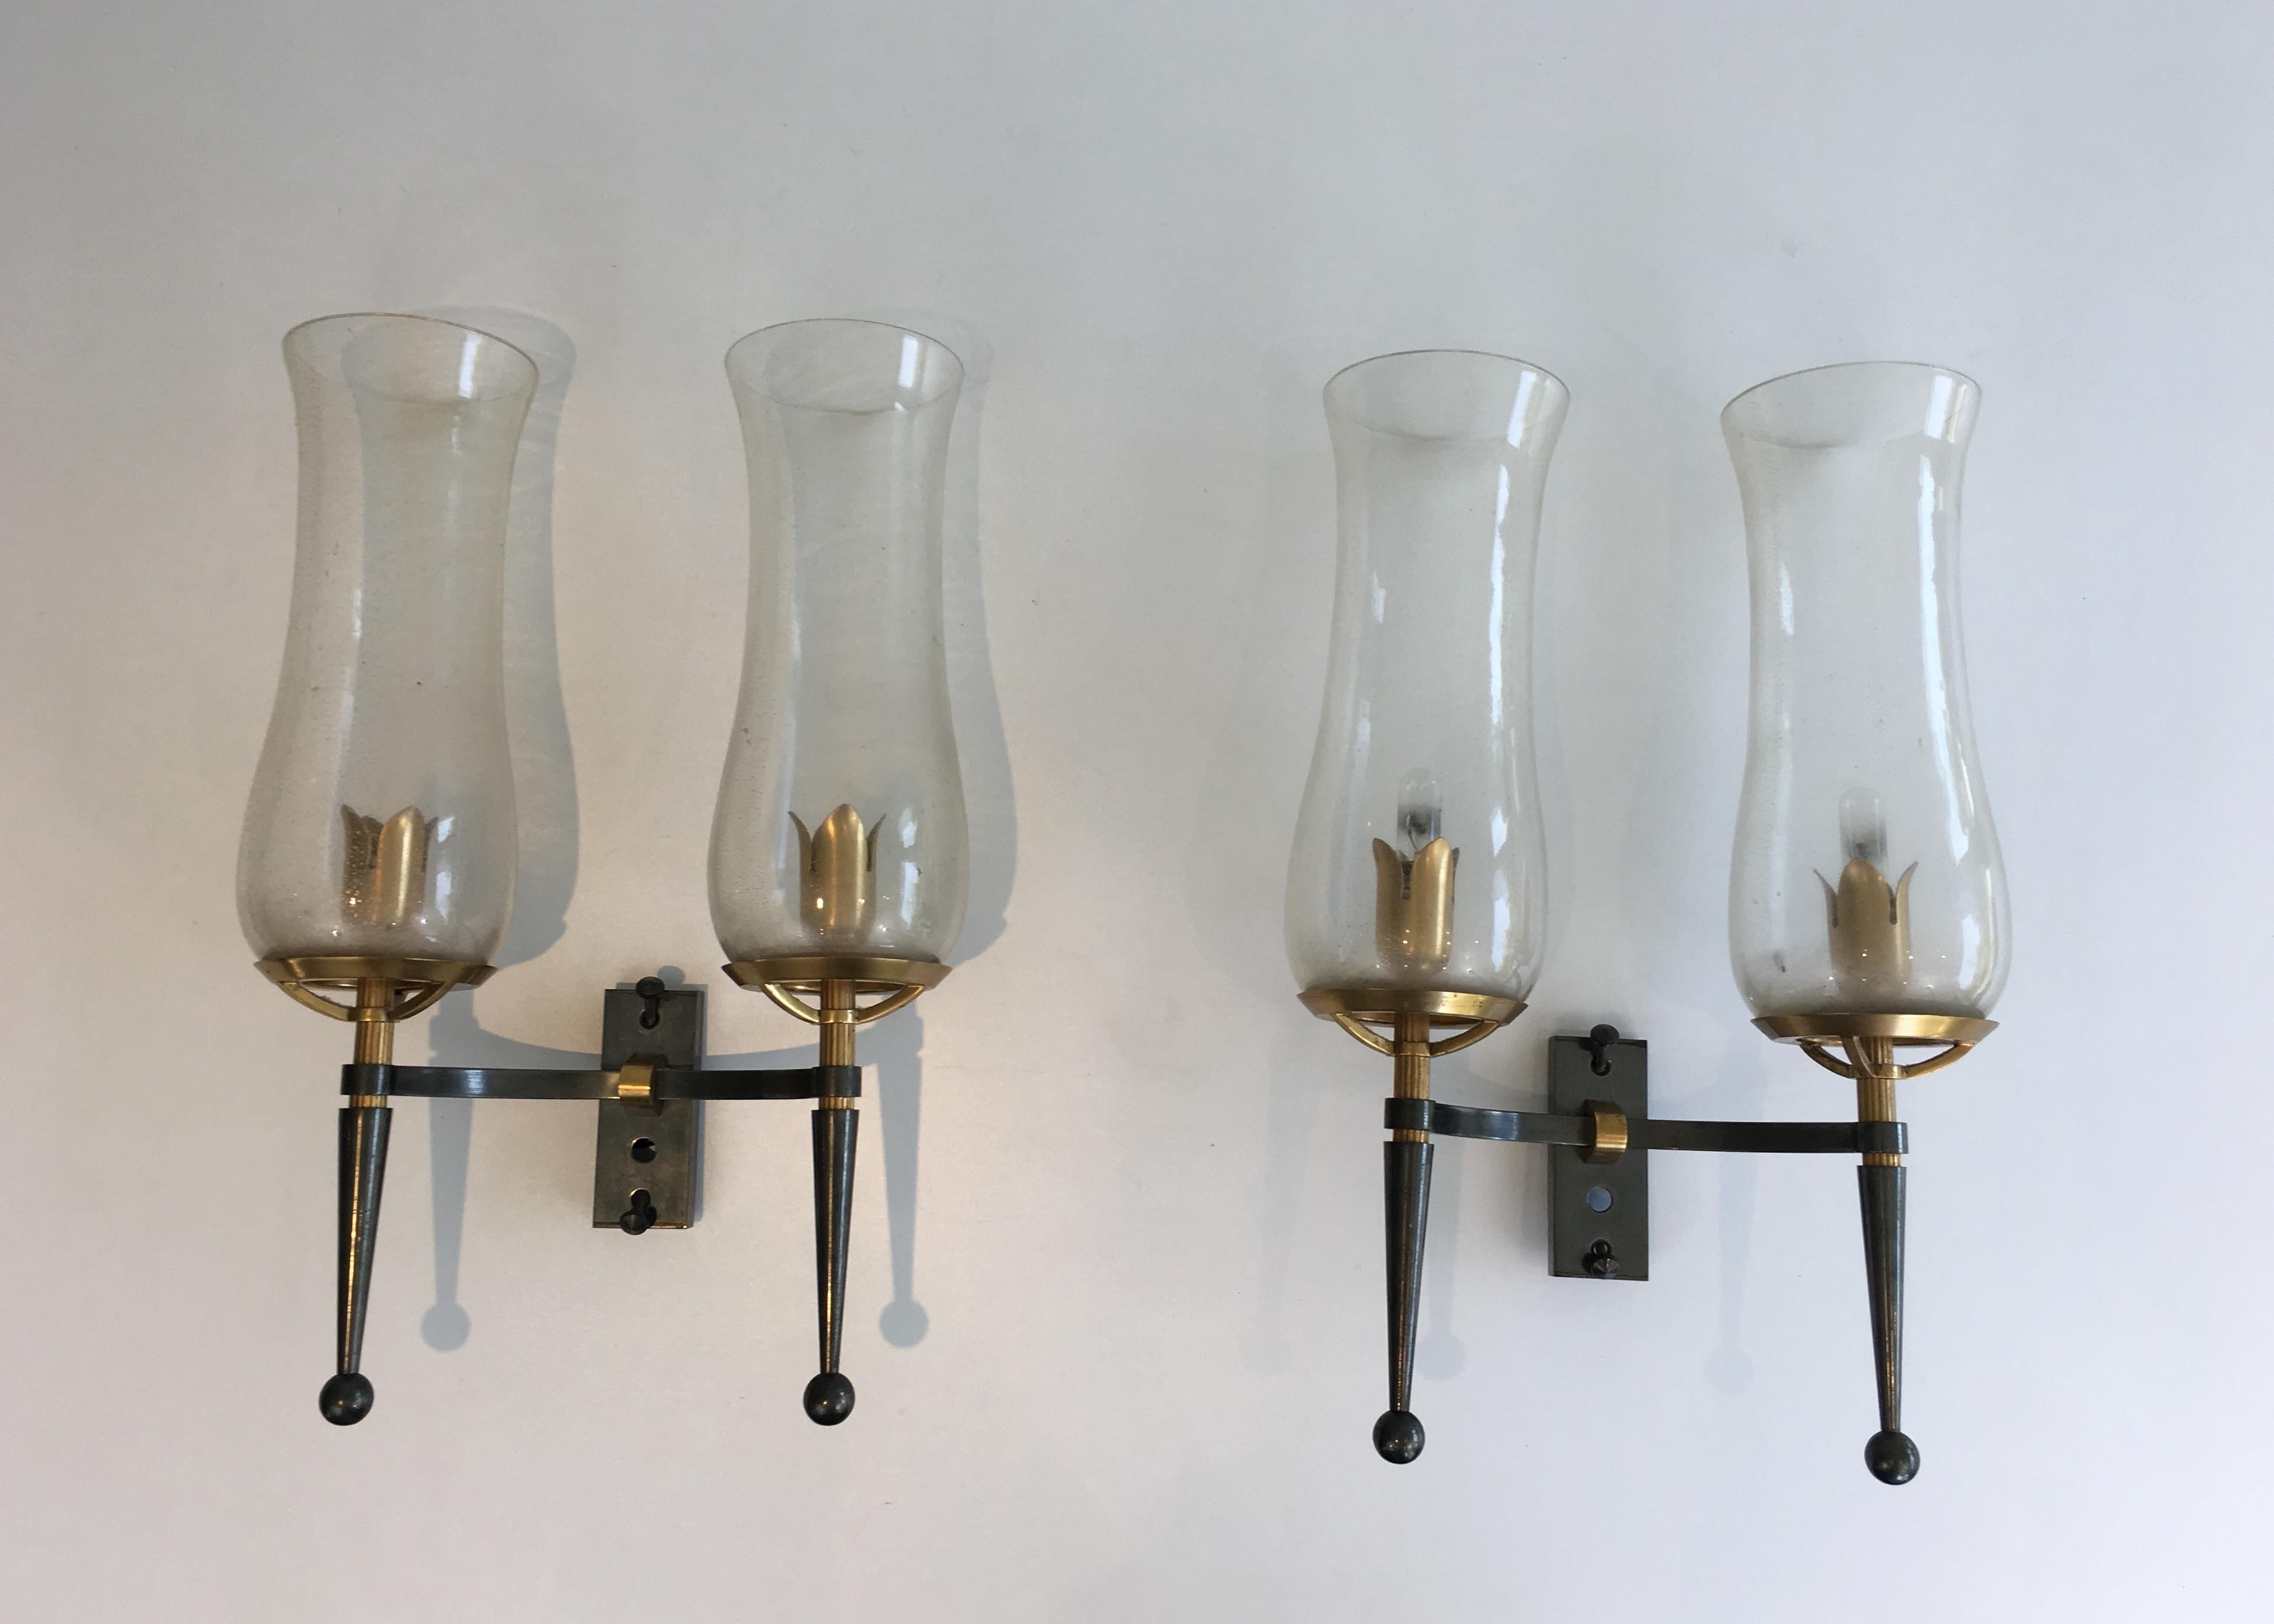 This beautiful pair of wall lights is made of gun metal steel and gilt bronze and brass. These wall sconces have very nice champagne Murano glass reflectors. They are probably a combination of a French designer and an Italian glass maker. Very nice